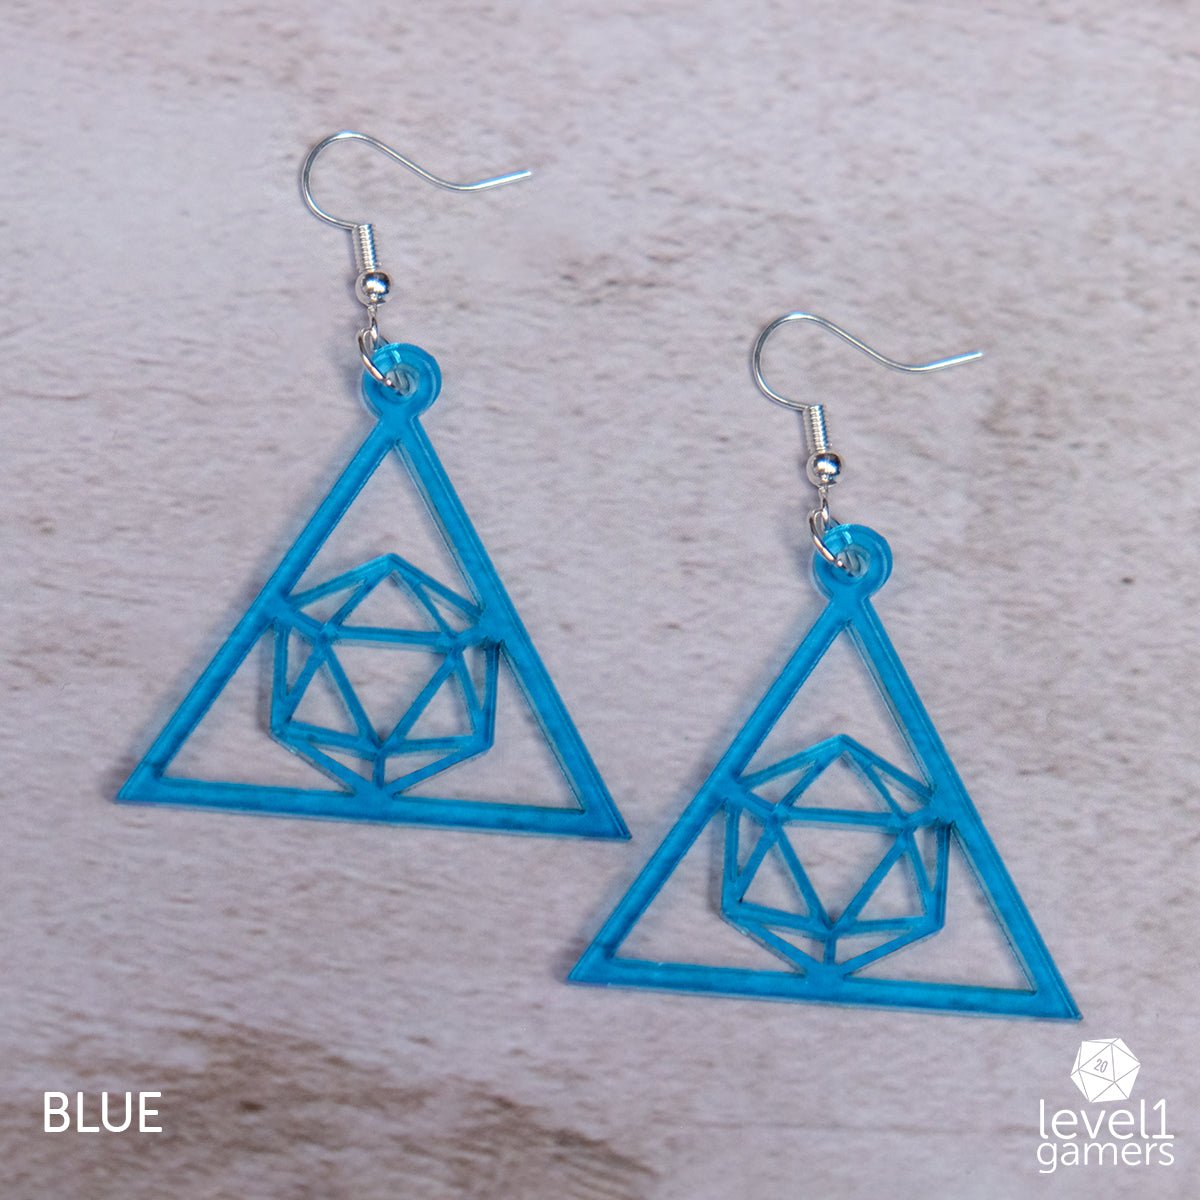 D20 Triangle Acrylic Earrings  Level 1 Gamers Pendant Blue 